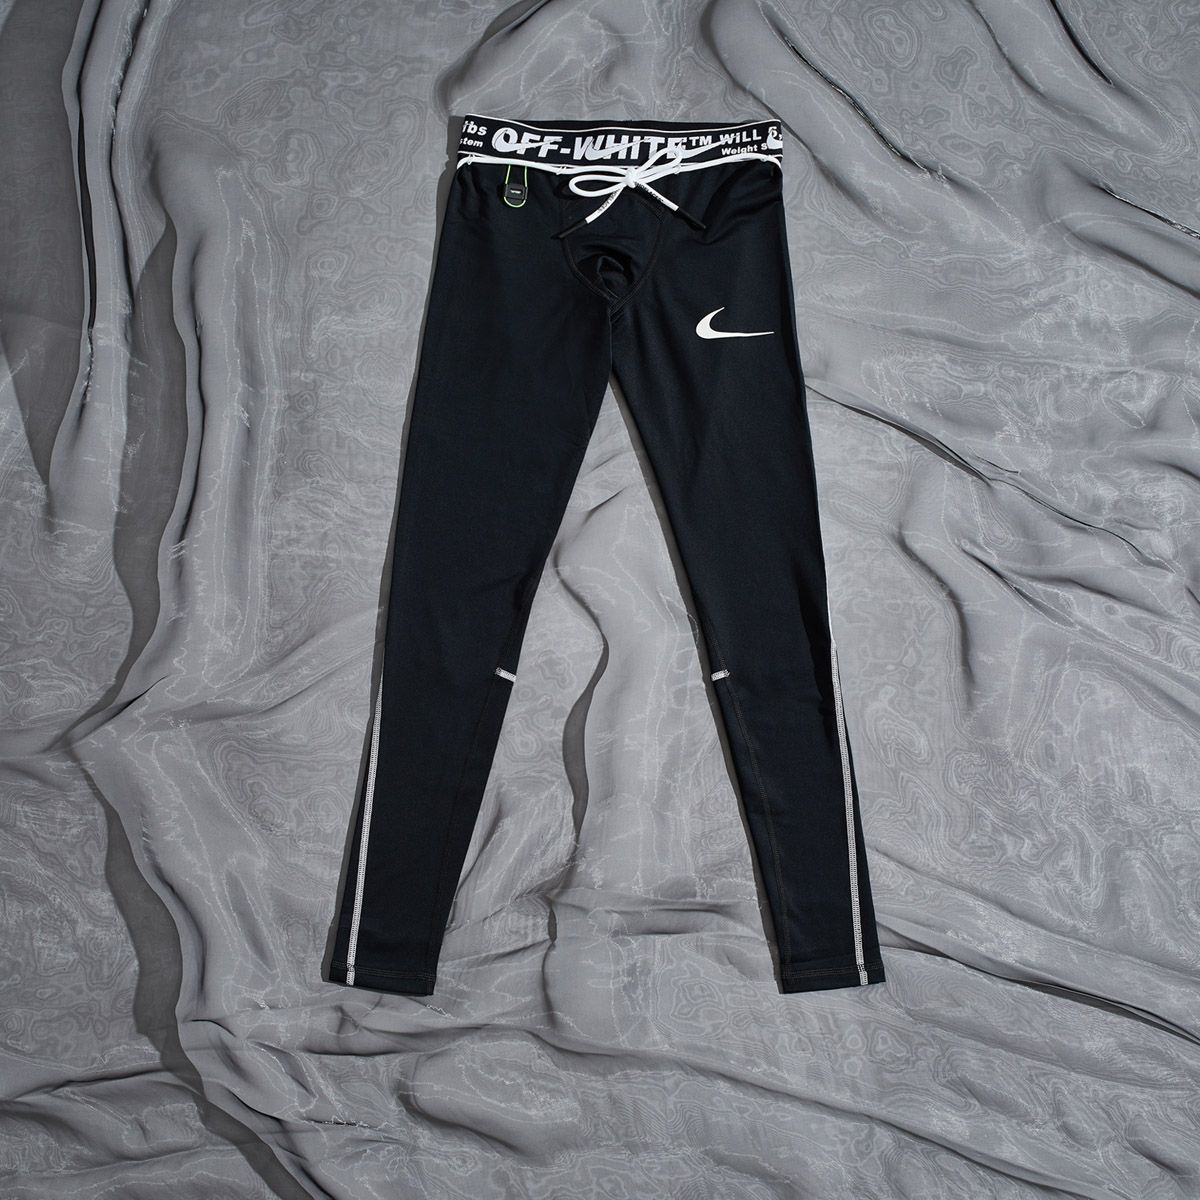 off white nike jogging suit